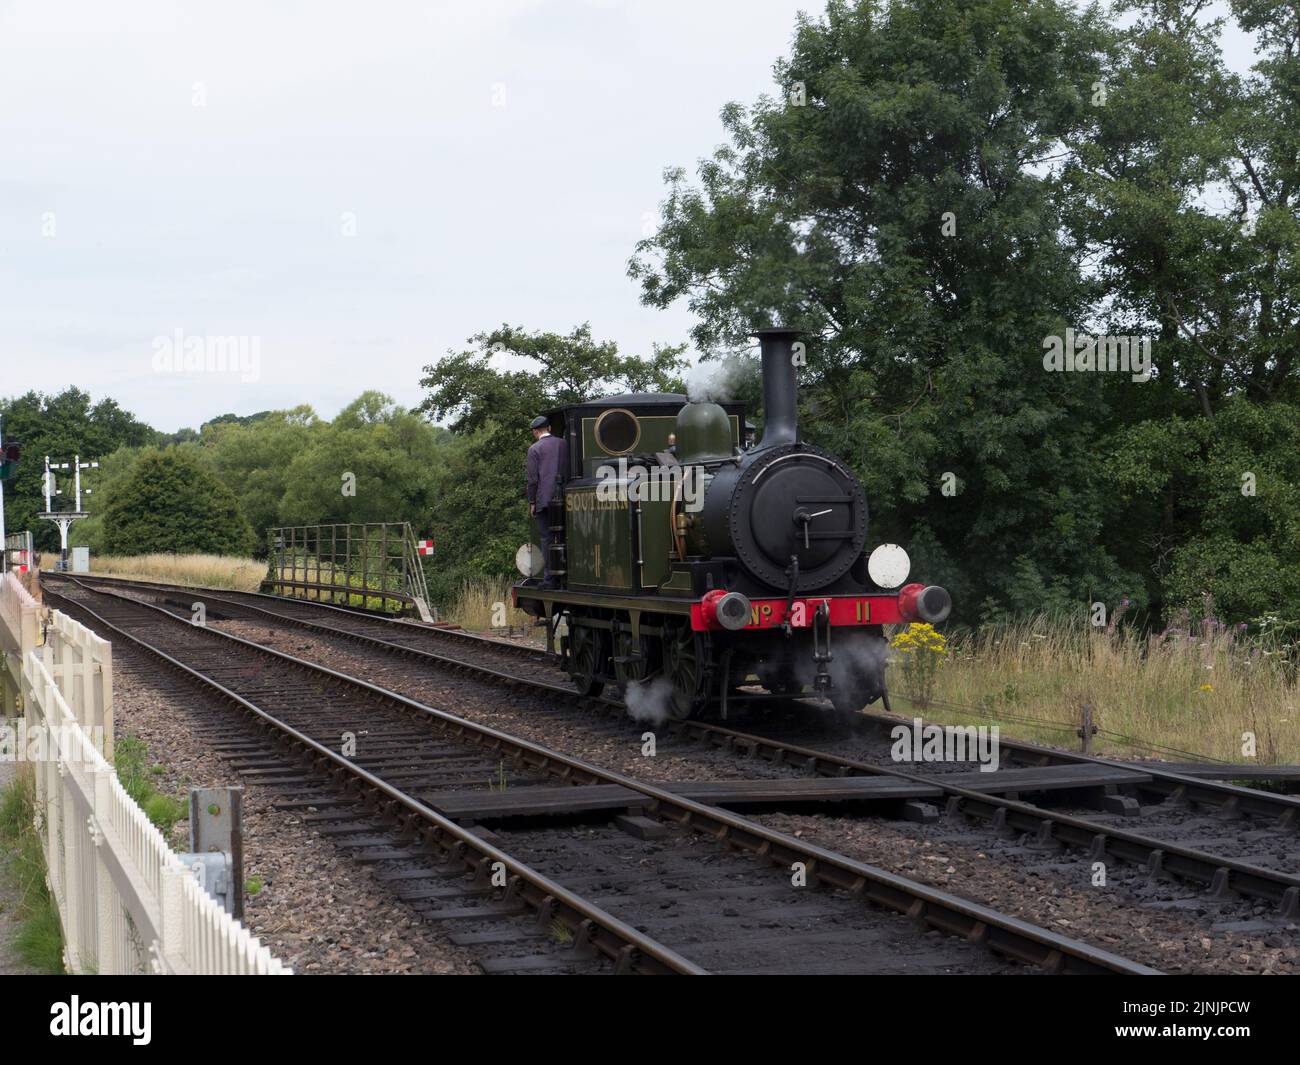 A1X (Terrier) Class W11 'Newport' locomotive at Sheffield Park station on the Bluebell Railway. Stock Photo